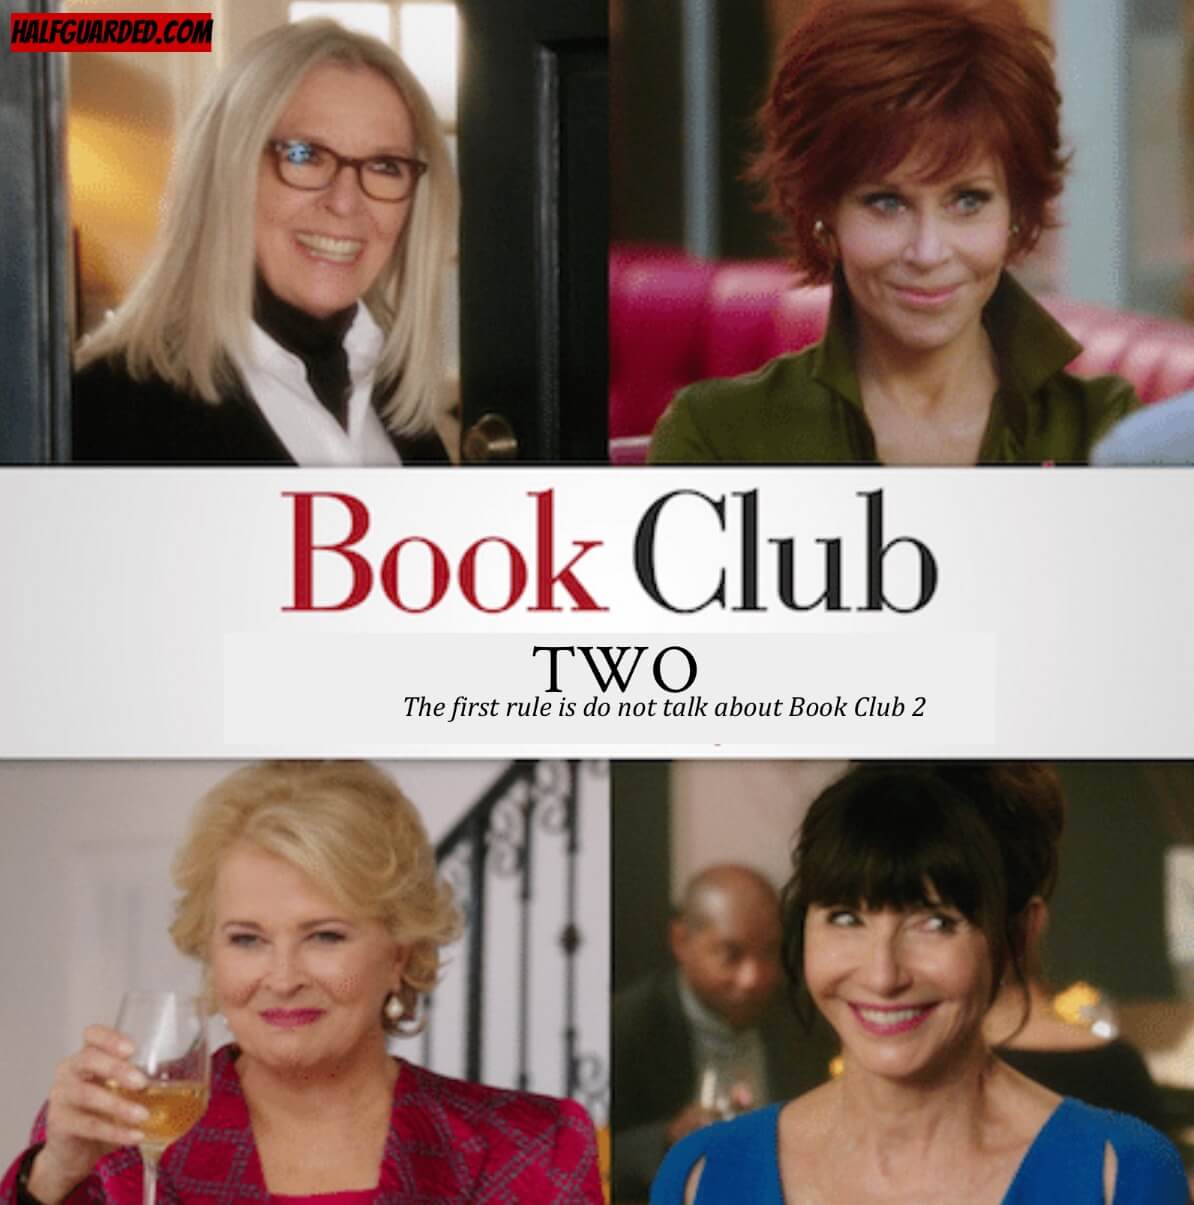 The Book Club 2 (2021) RUMORS, Plot, Cast, and Release Date News - WILL THERE BE The Book Club 2?!